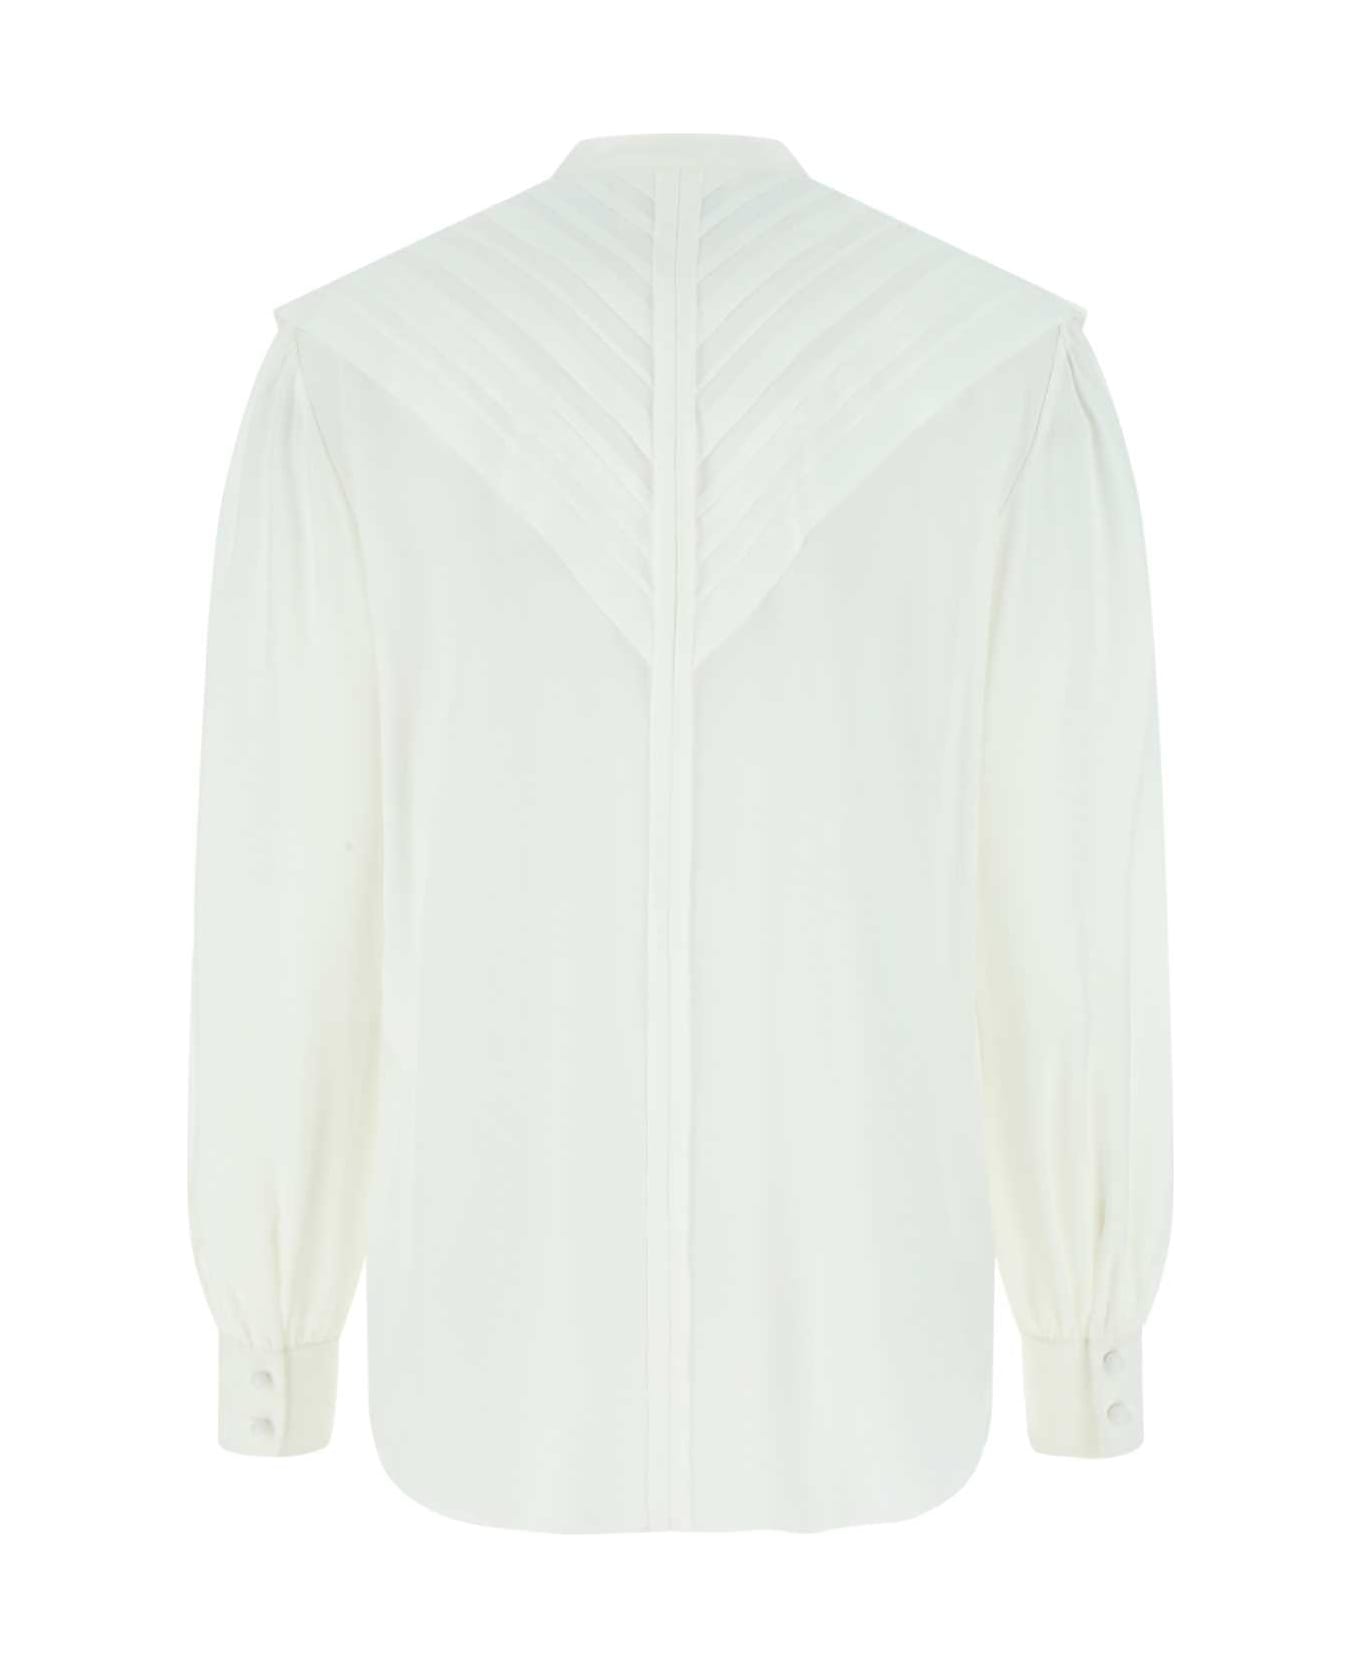 Chloé Ivory Crepe Blouse - 107 ブラウス